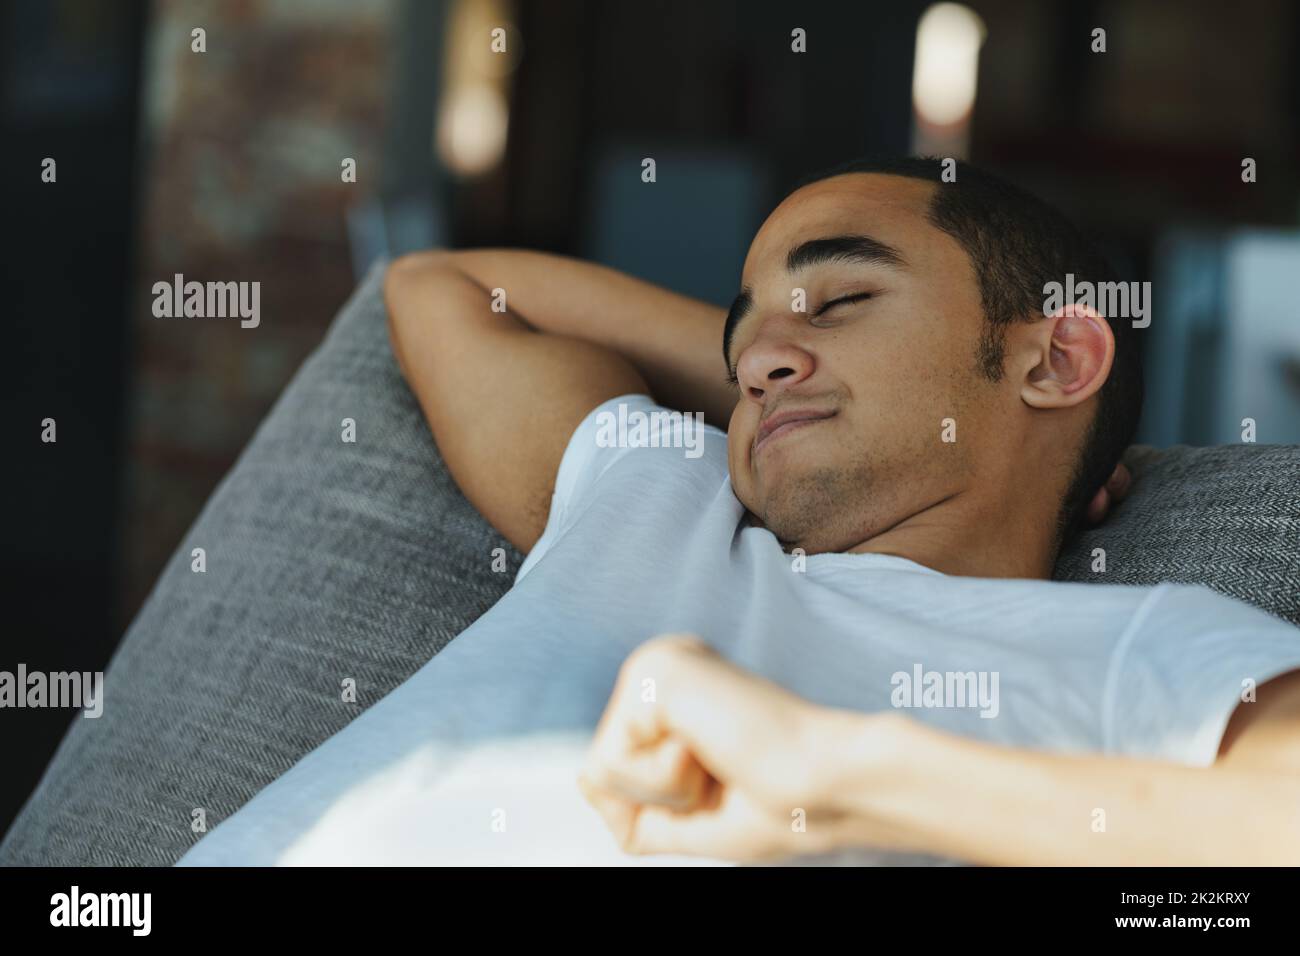 Exhausted young Black man enjoying a quiet nap Stock Photo